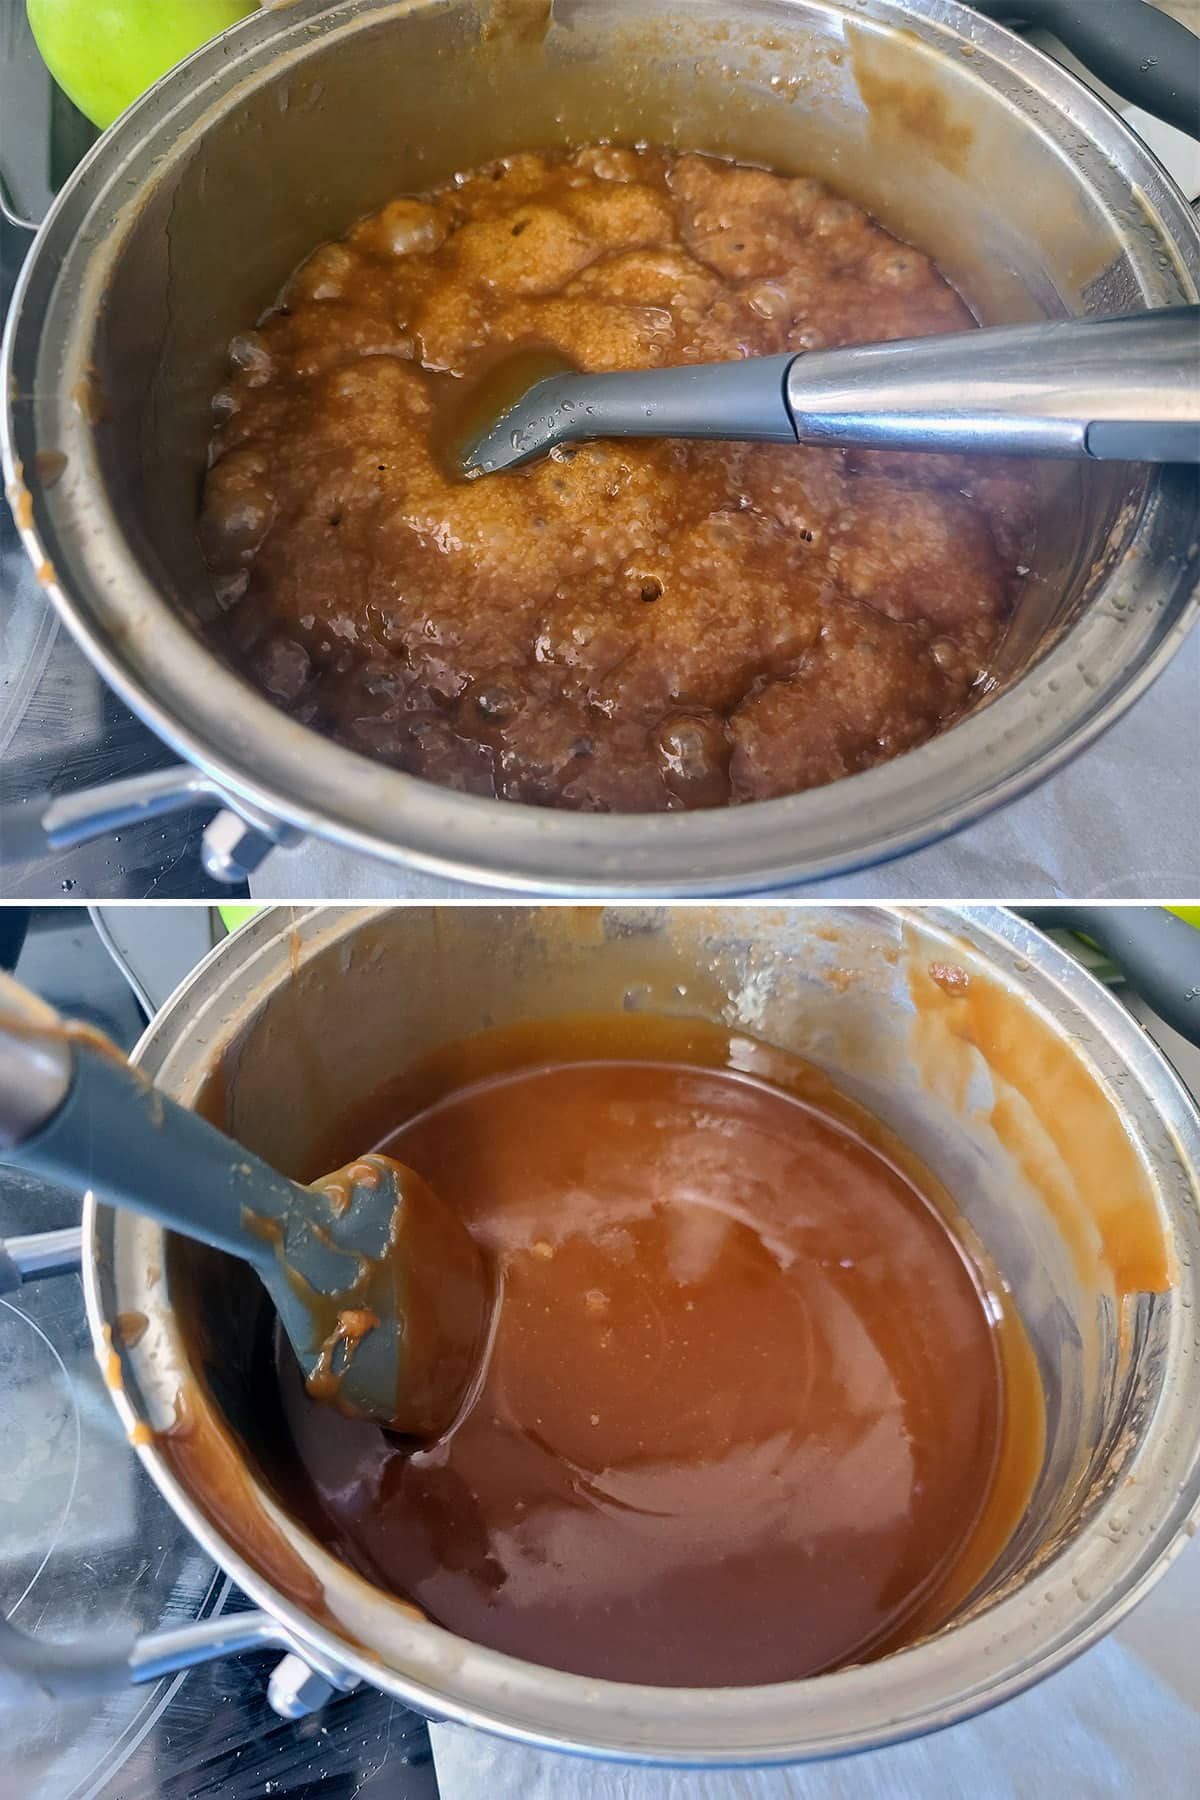 A 2 part image showing a boiling pot of maple syrup caramel, and the smooth caramel after being removed from the heat.